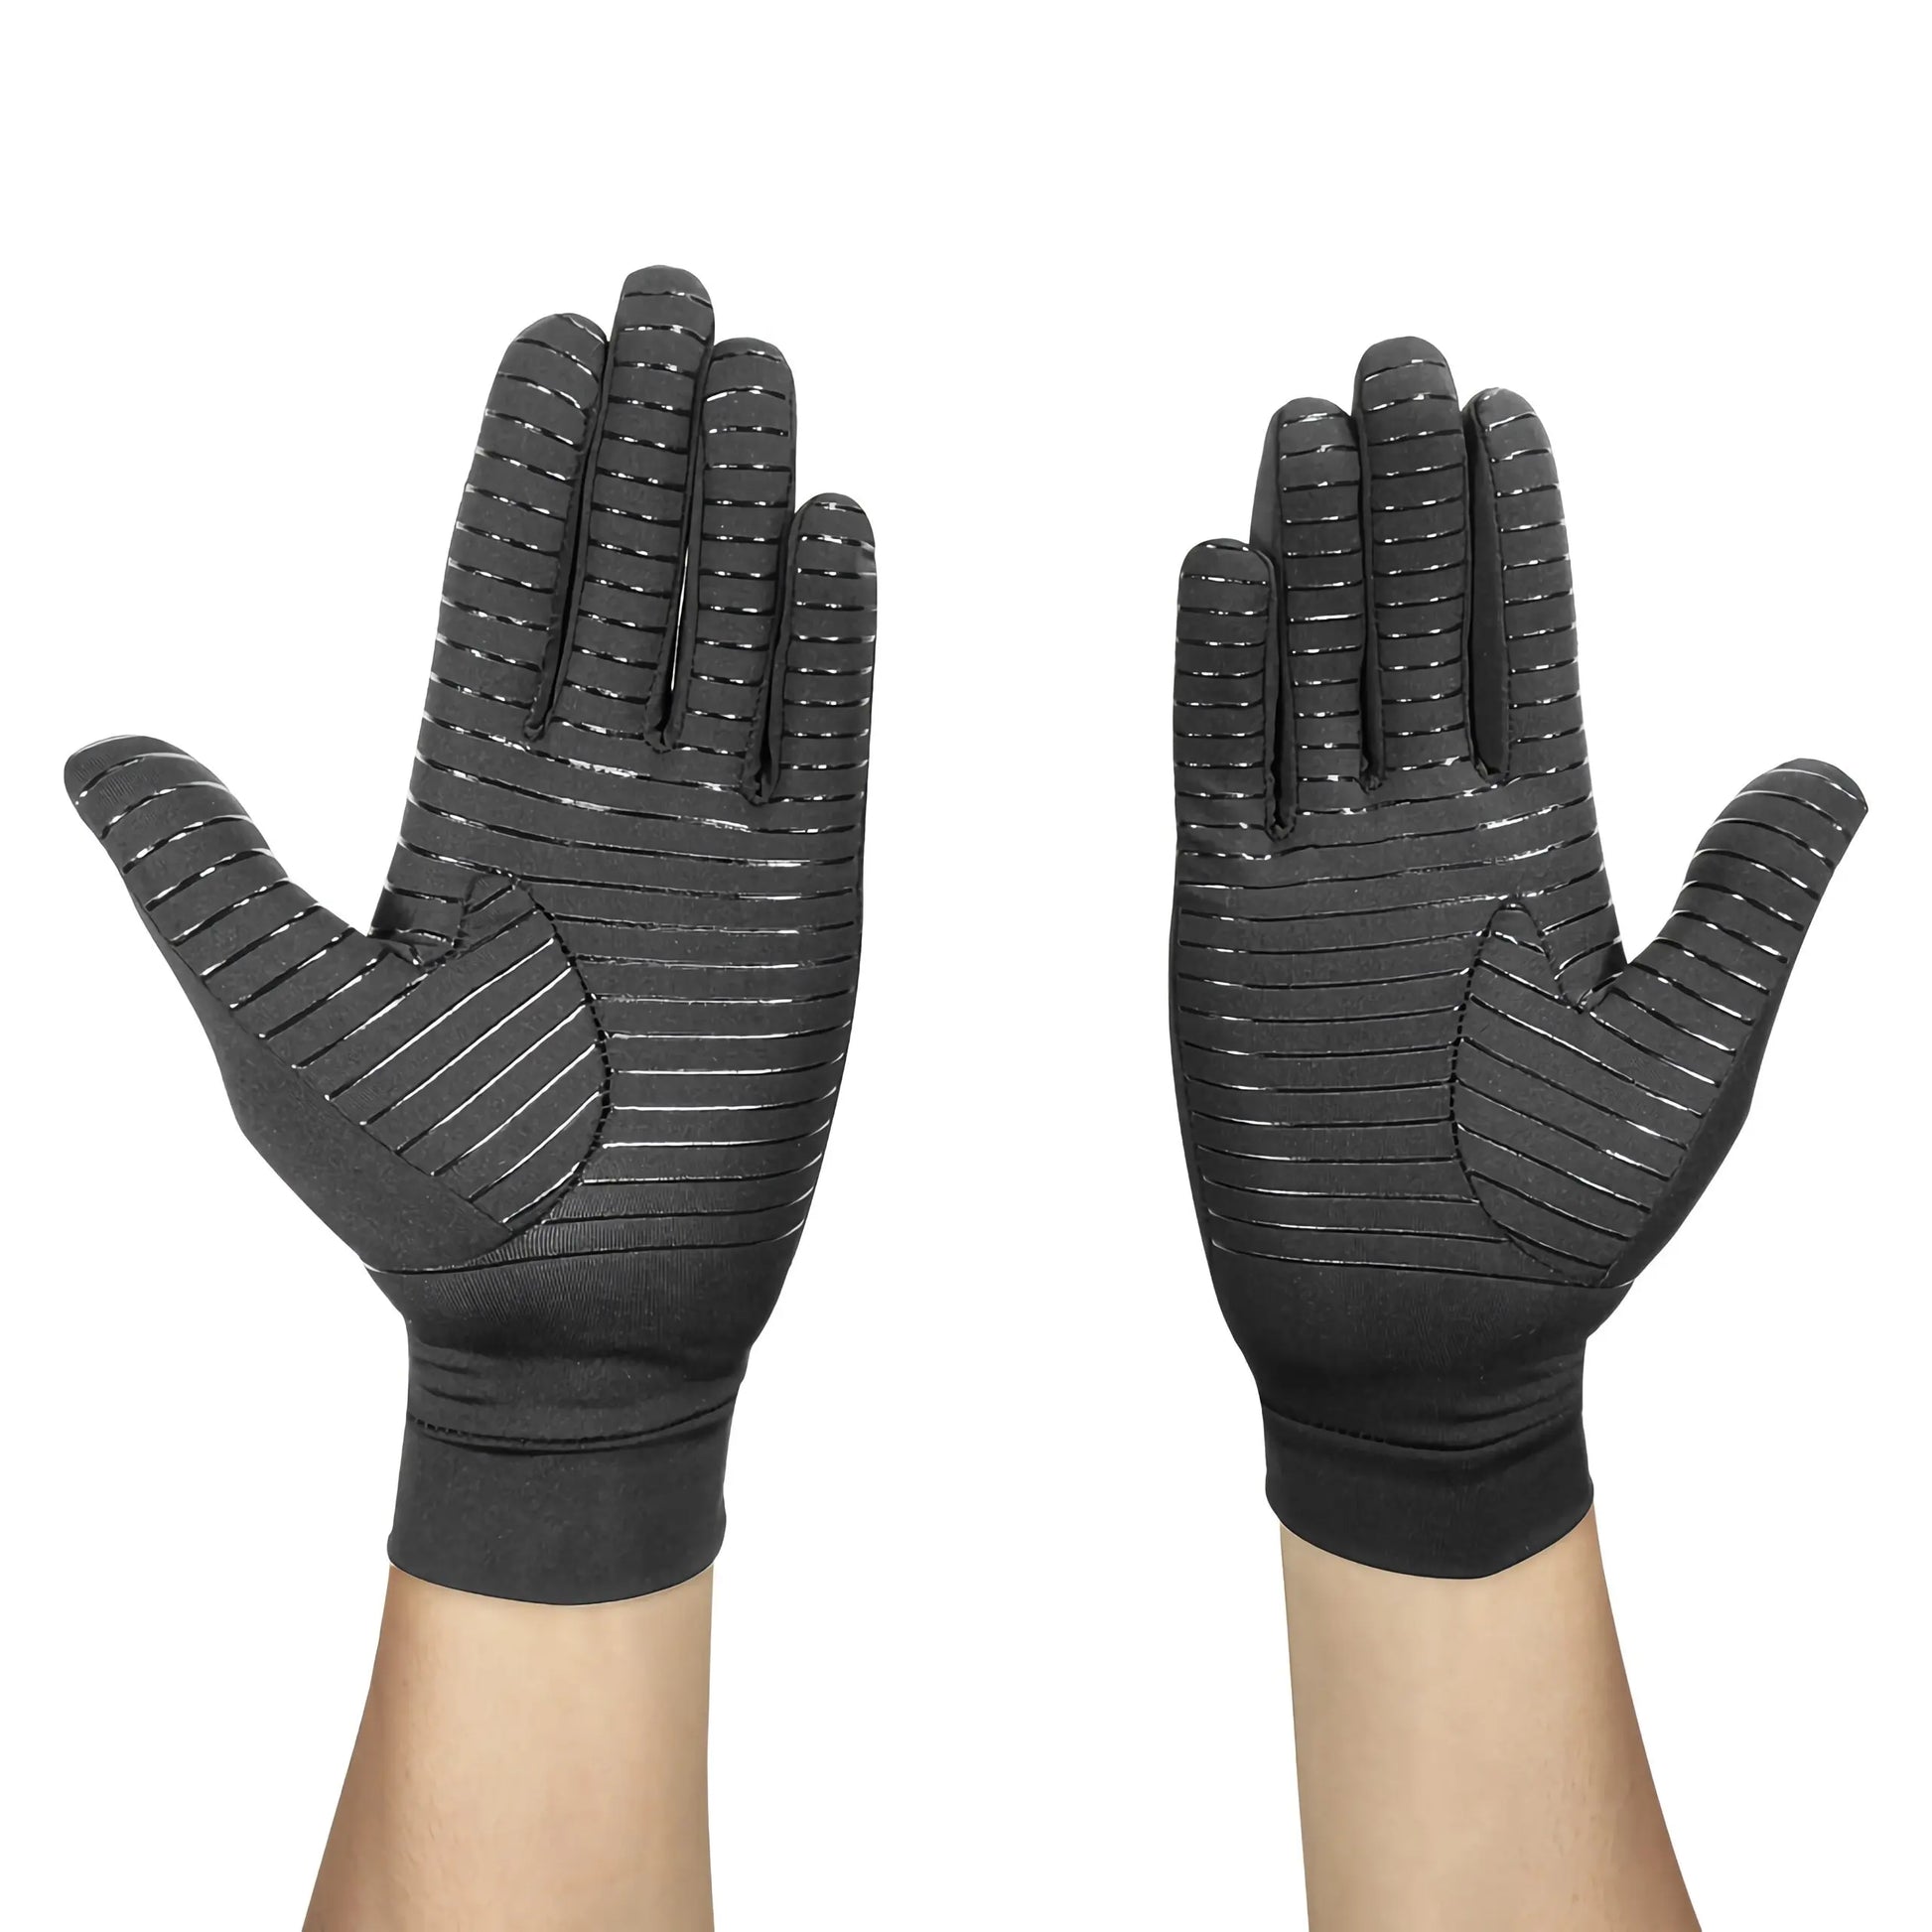 Copper Infused Compression Gloves for arthritis and compression